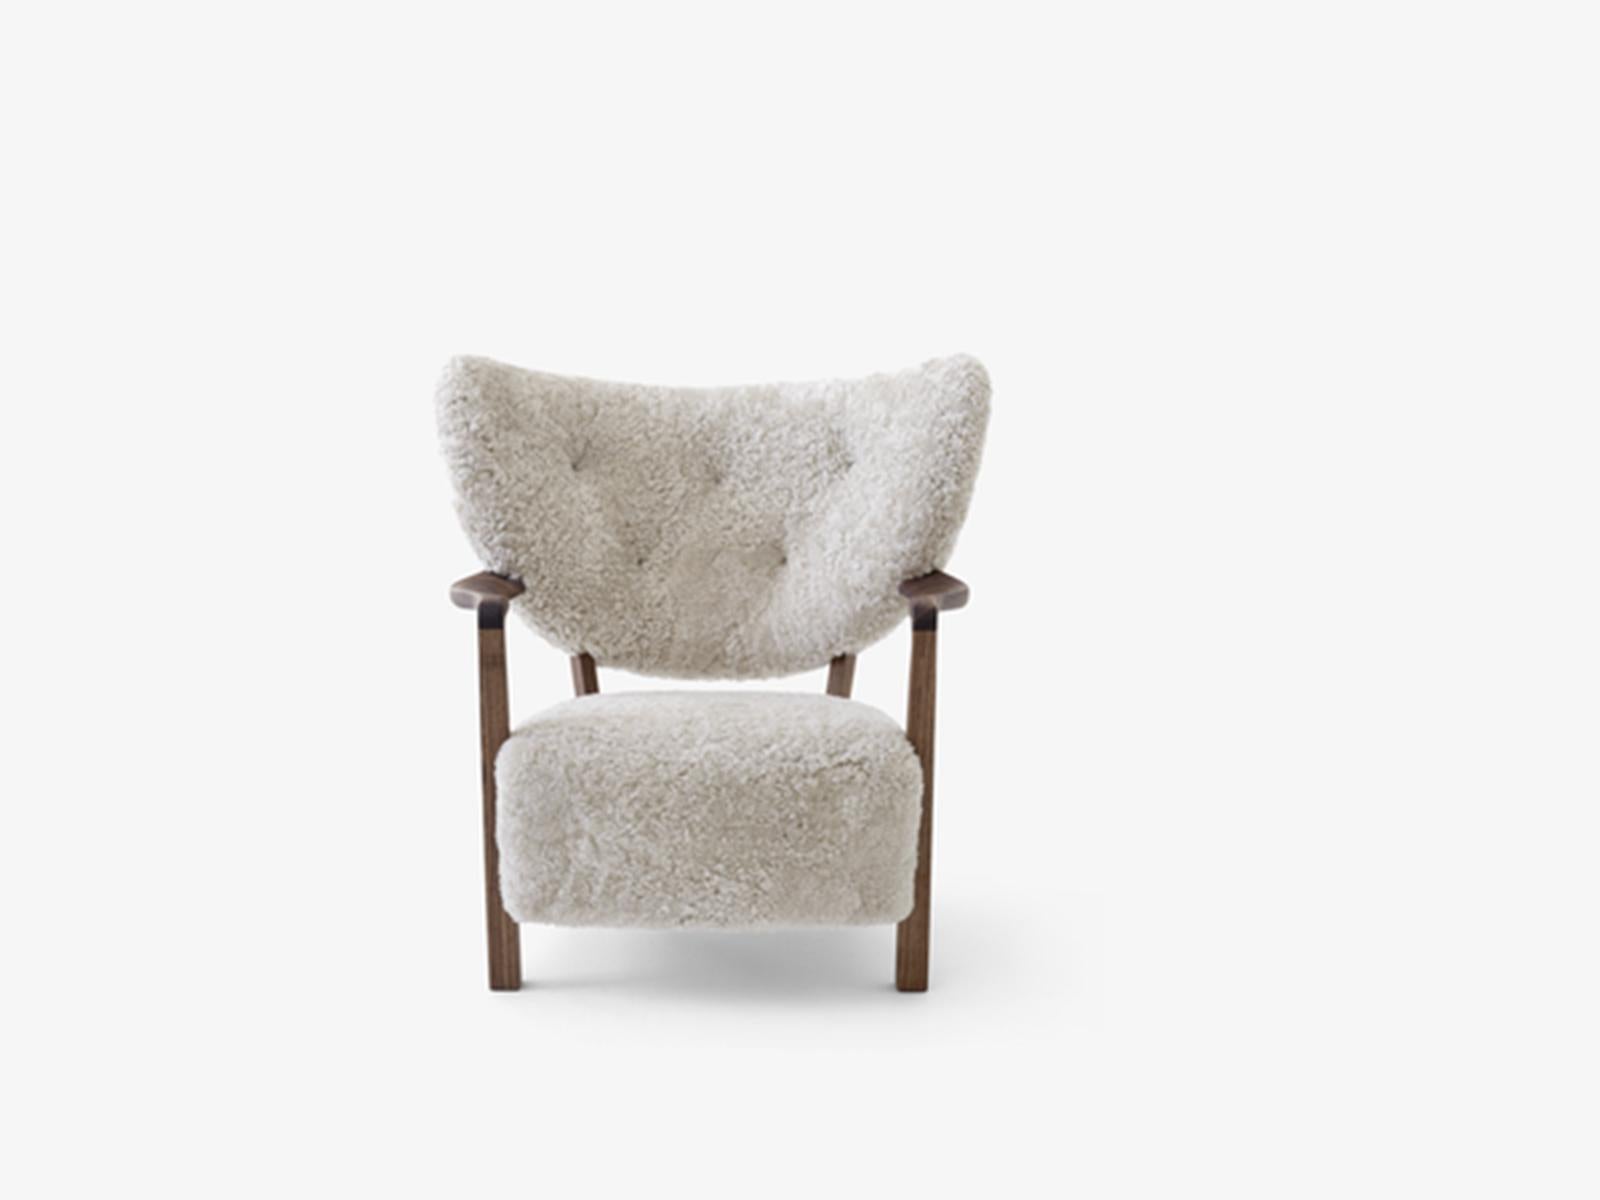 Introducing Wulff, a lounge chair whose upholstered form pays tribute to the hand-crafted designs of the 1930's. 
Wulff promises superior craftsmanship and outstanding comfort with luxuriantly soft upholstery that covers its seat and backrest.